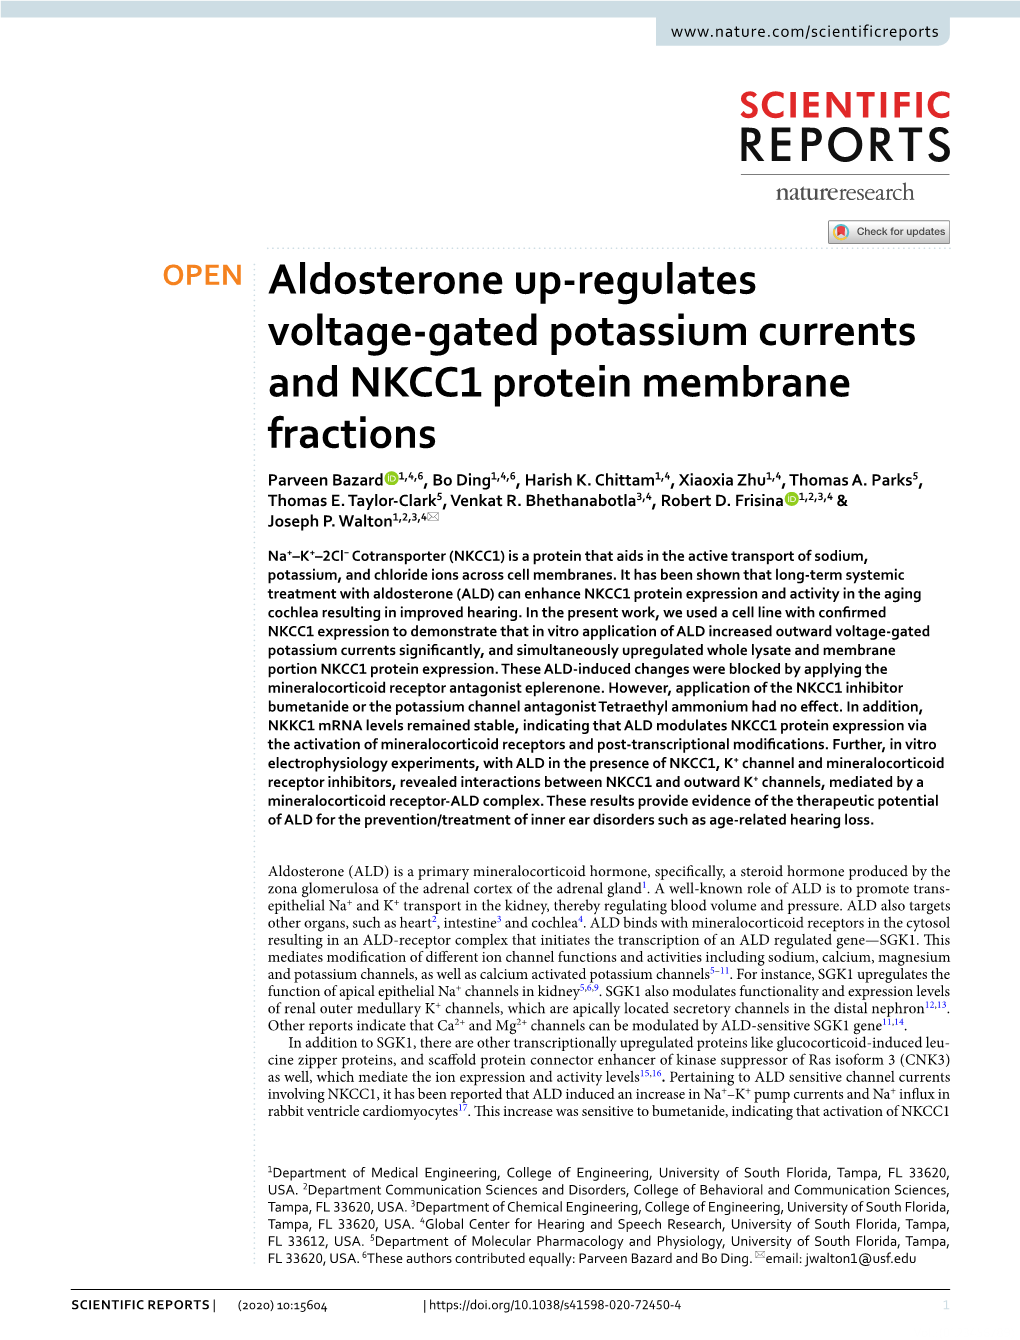 Aldosterone Up-Regulates Voltage-Gated Potassium Currents and NKCC1 Protein Membrane Fractions